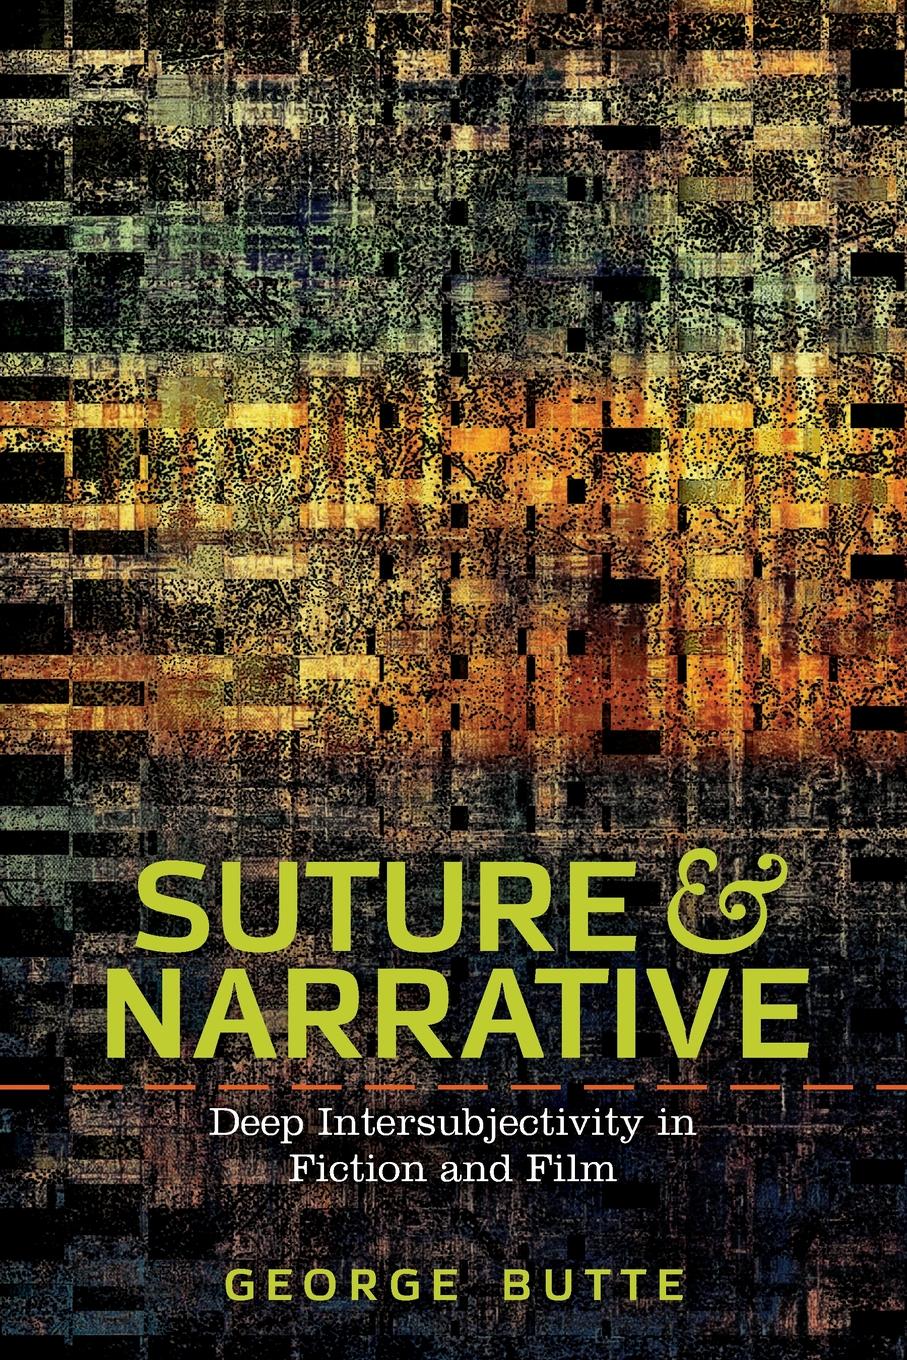 GEORGE BUTTE Suture and Narrative. Deep Intersubjectivity in Fiction and Film